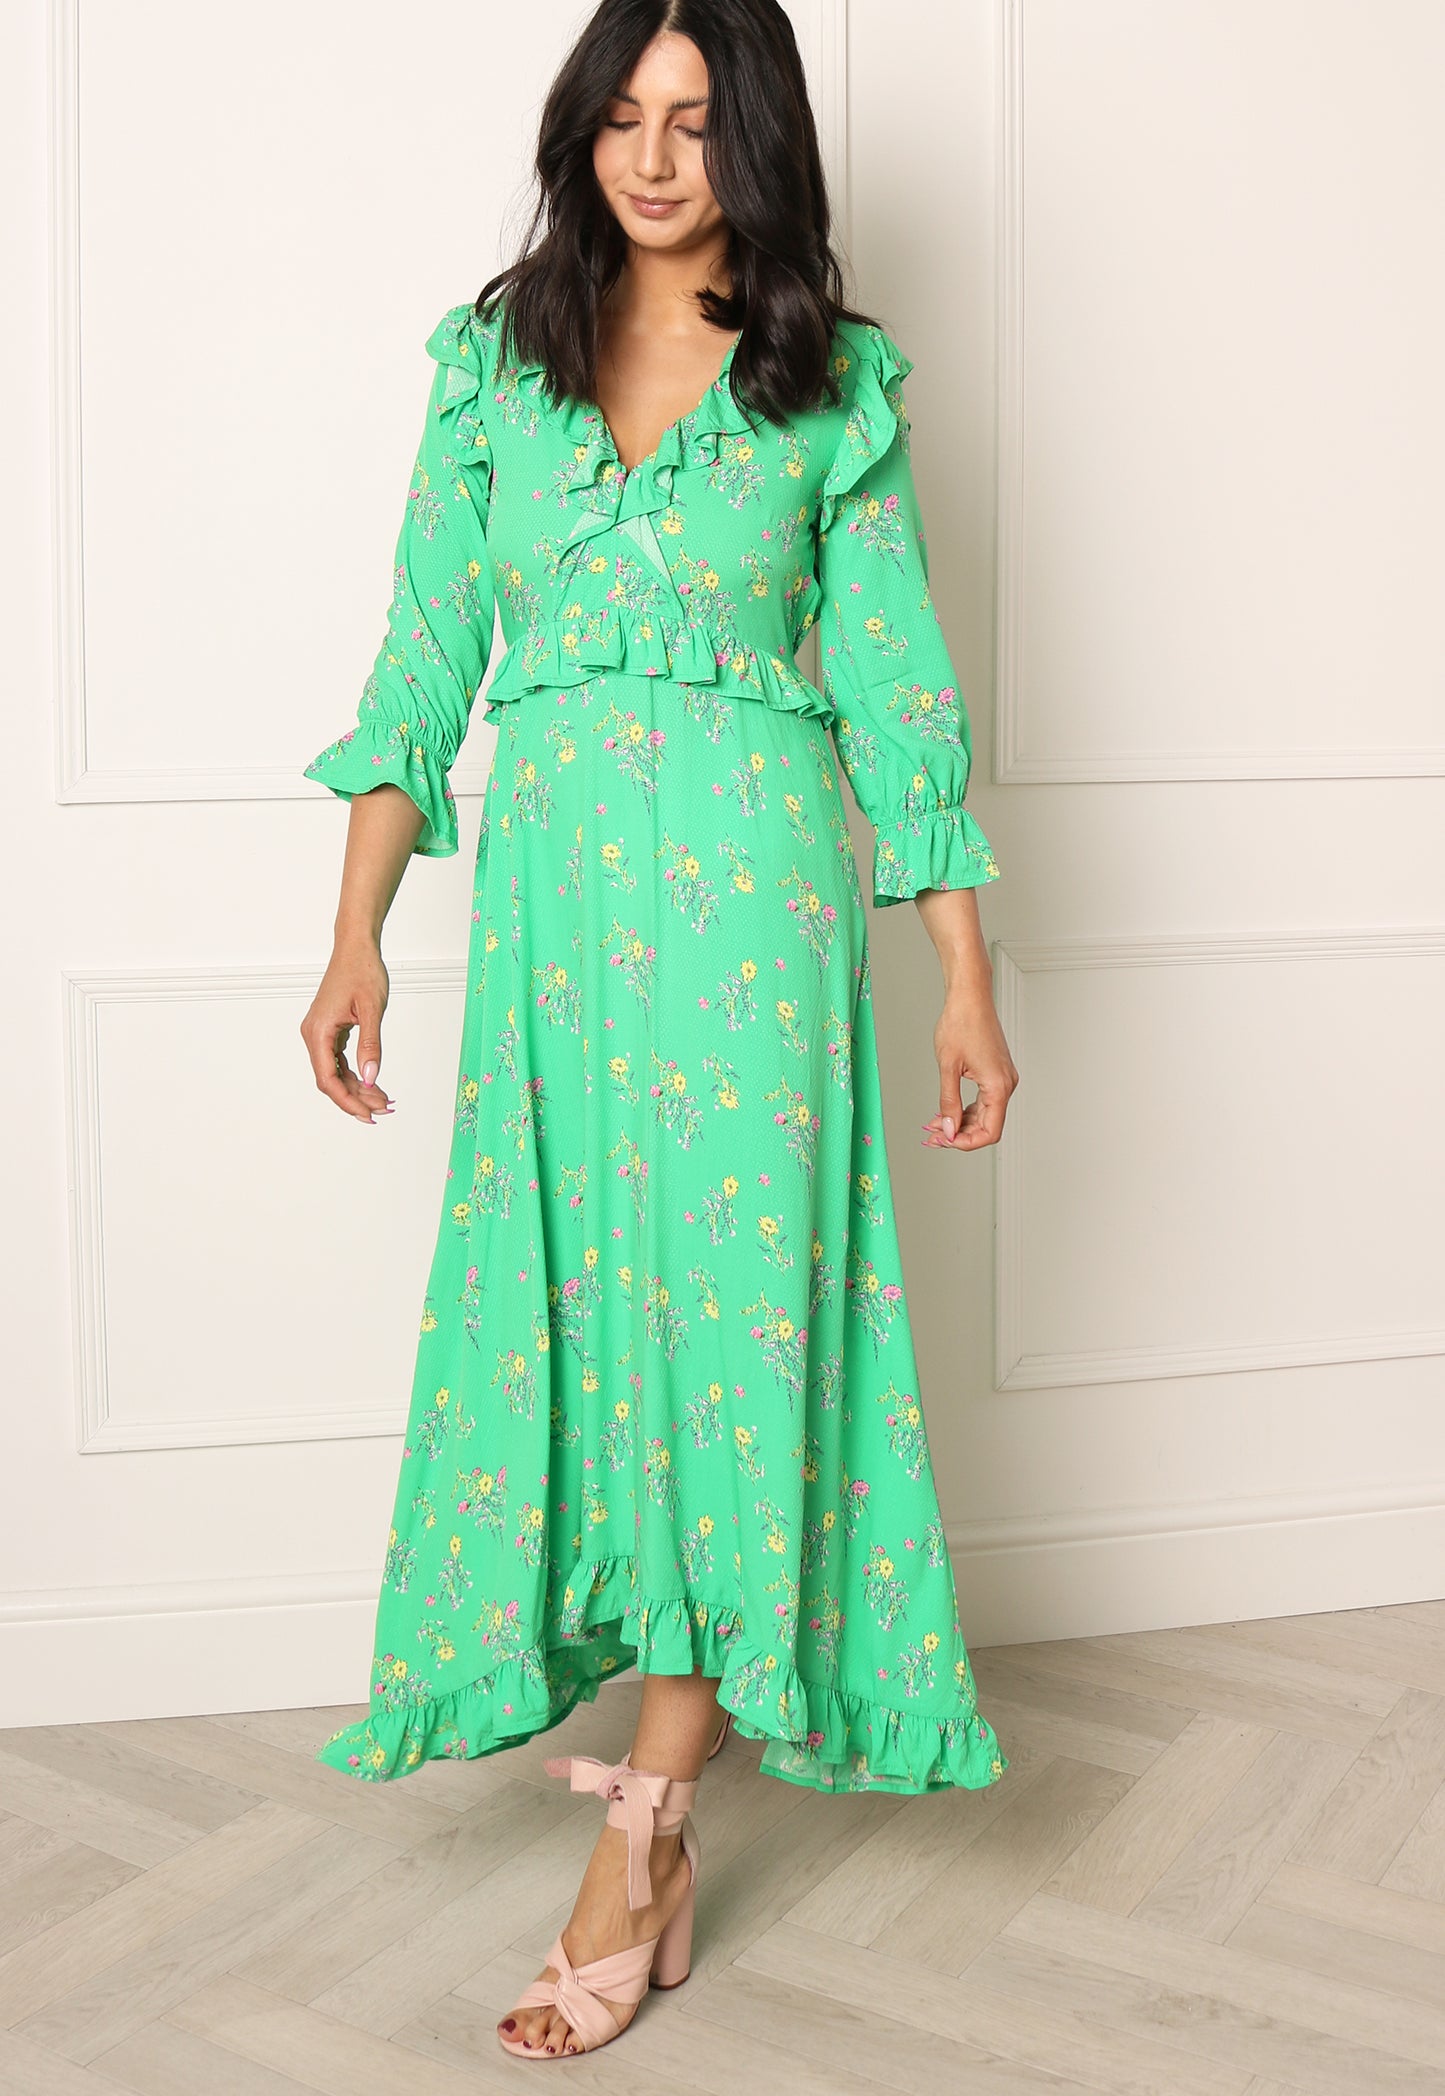 YAS Ofelia Floral Print Midaxi Dress with Frill Details in Bright Green - concretebartops